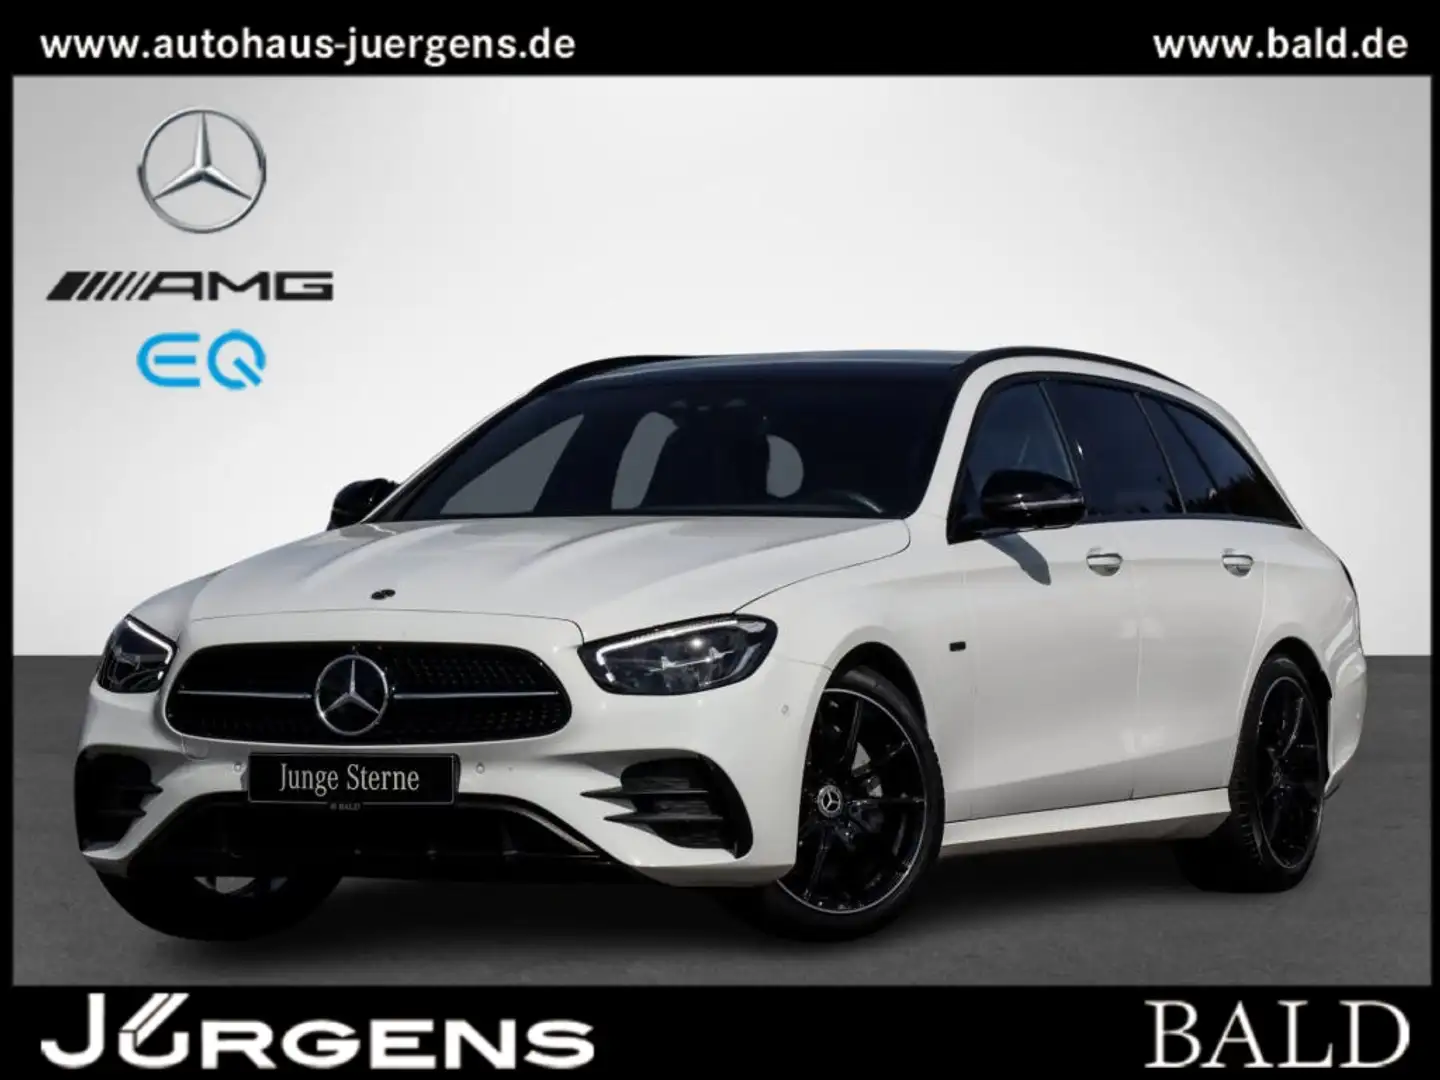 Mercedes-Benz E 220 d T AMG/Wide/LED/Pano/AHK/360/Night/19" Weiß - 2